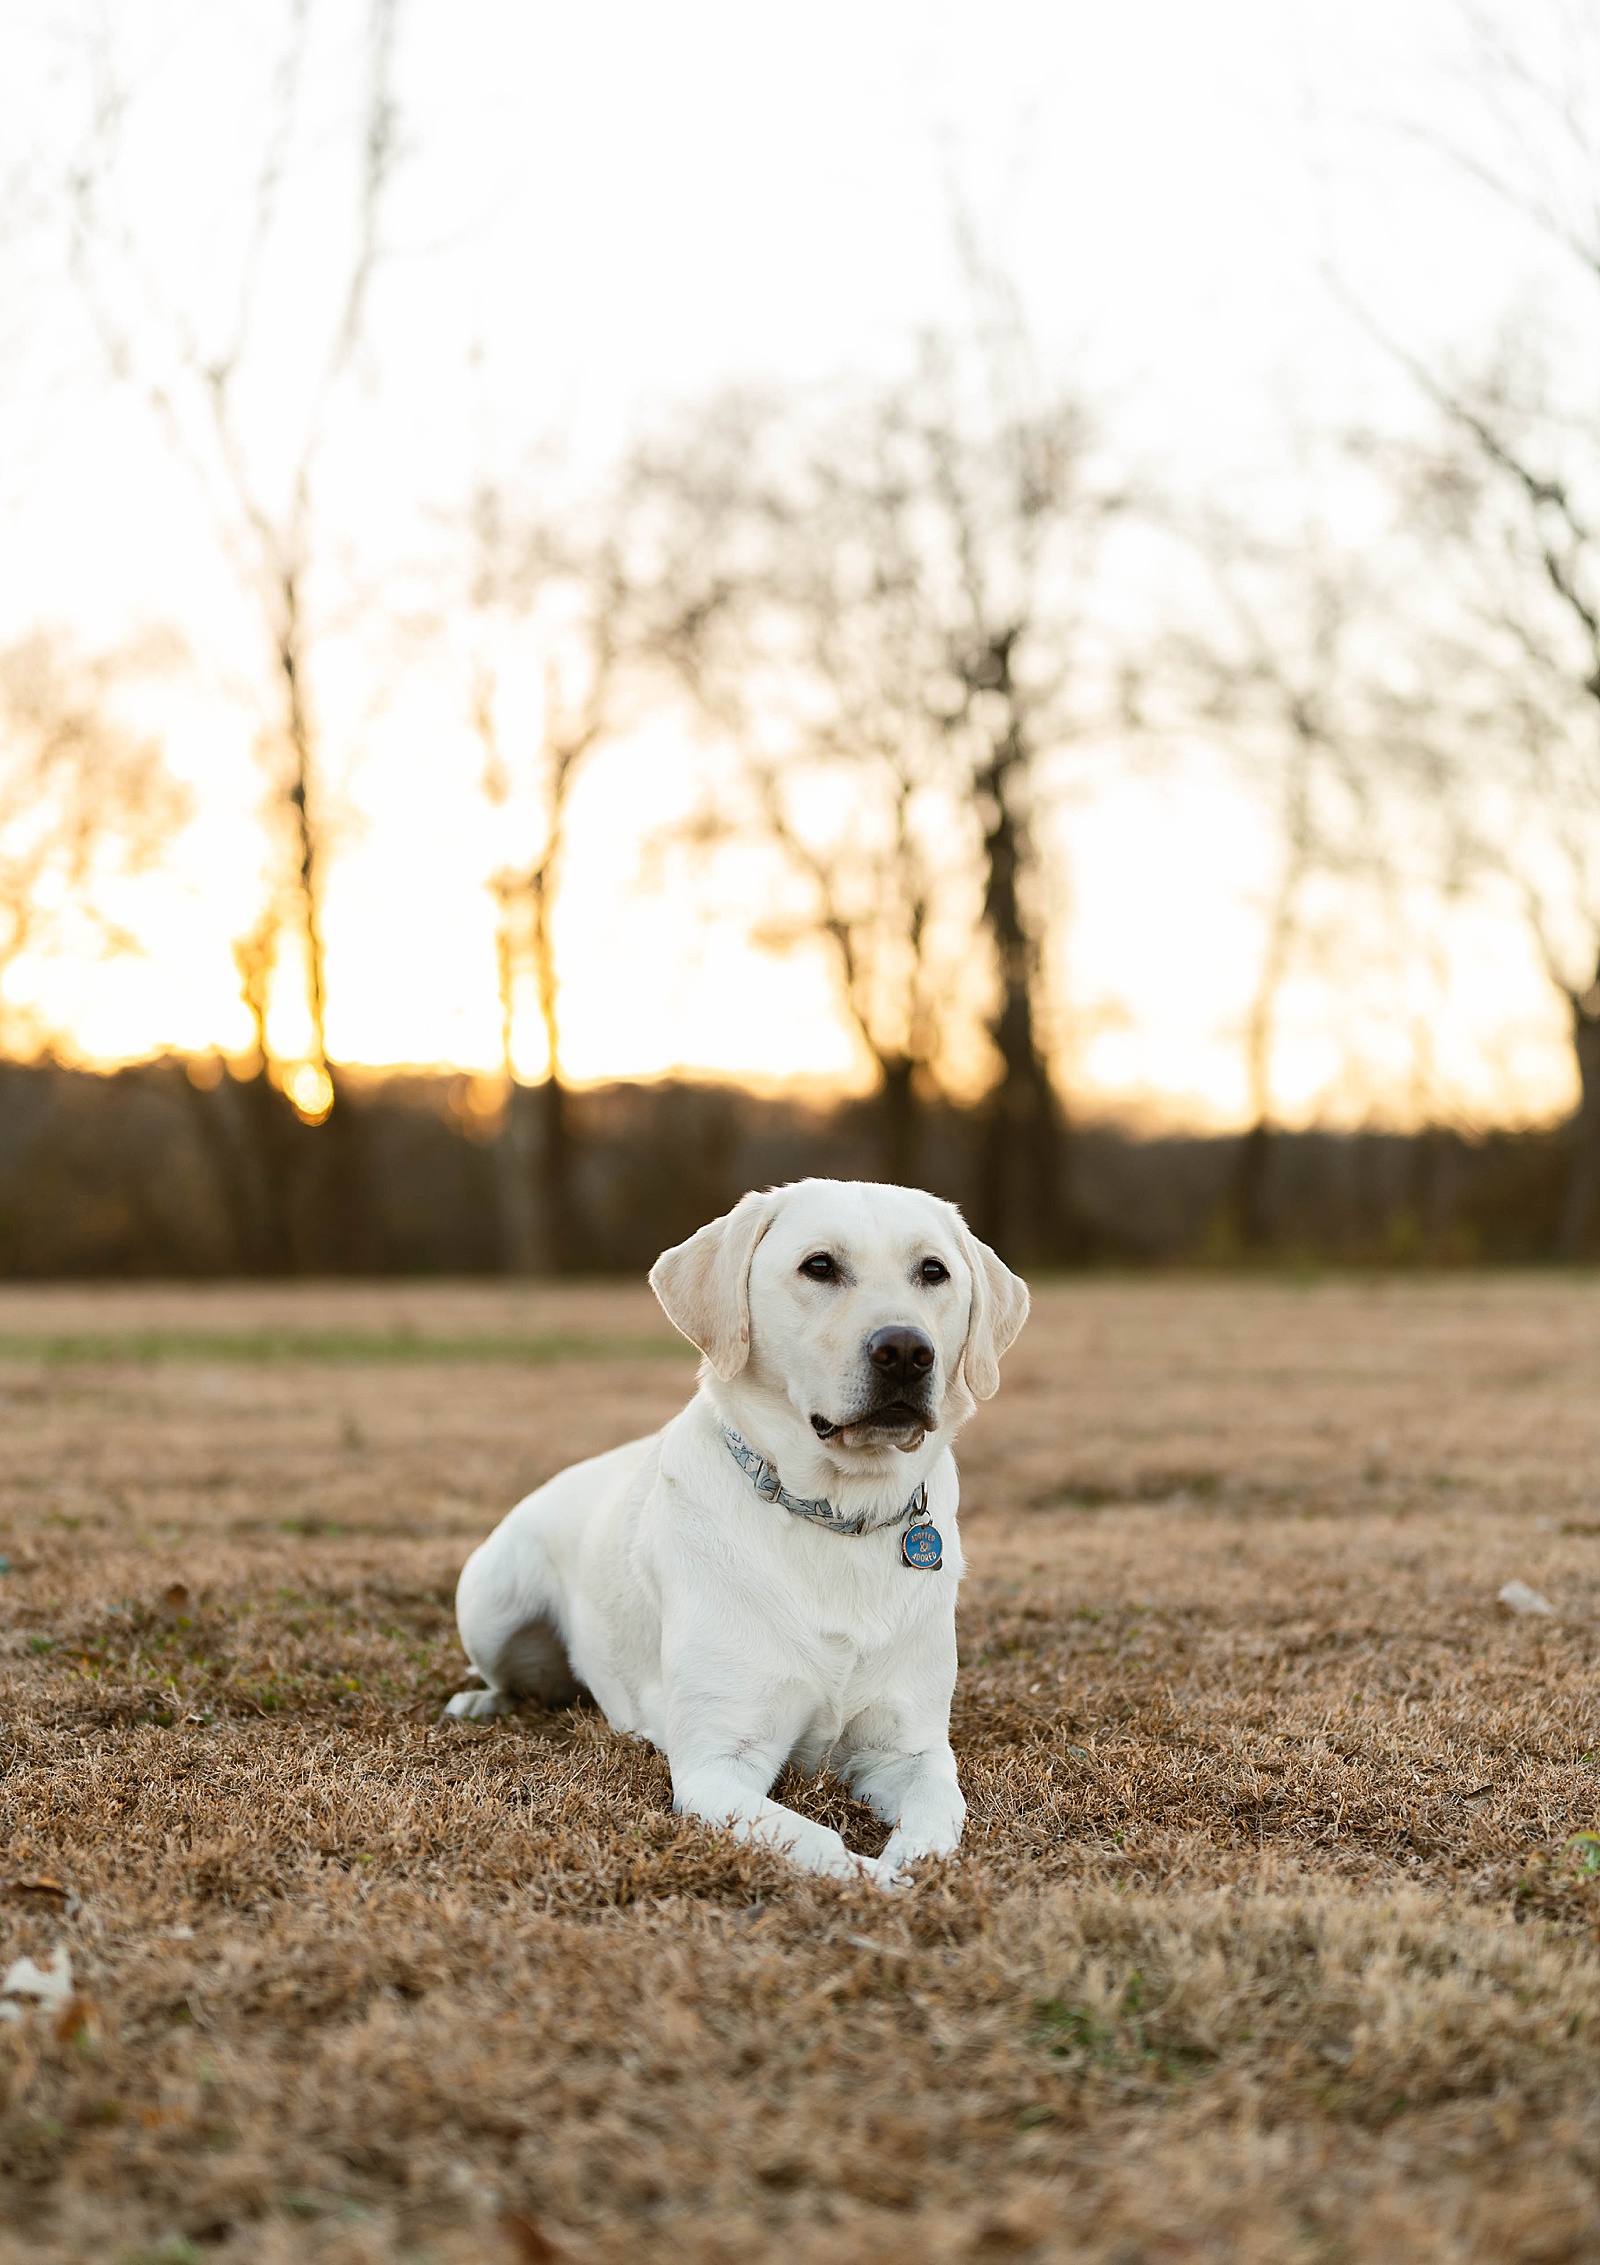 White dog sitting in grass for Holiday photos 